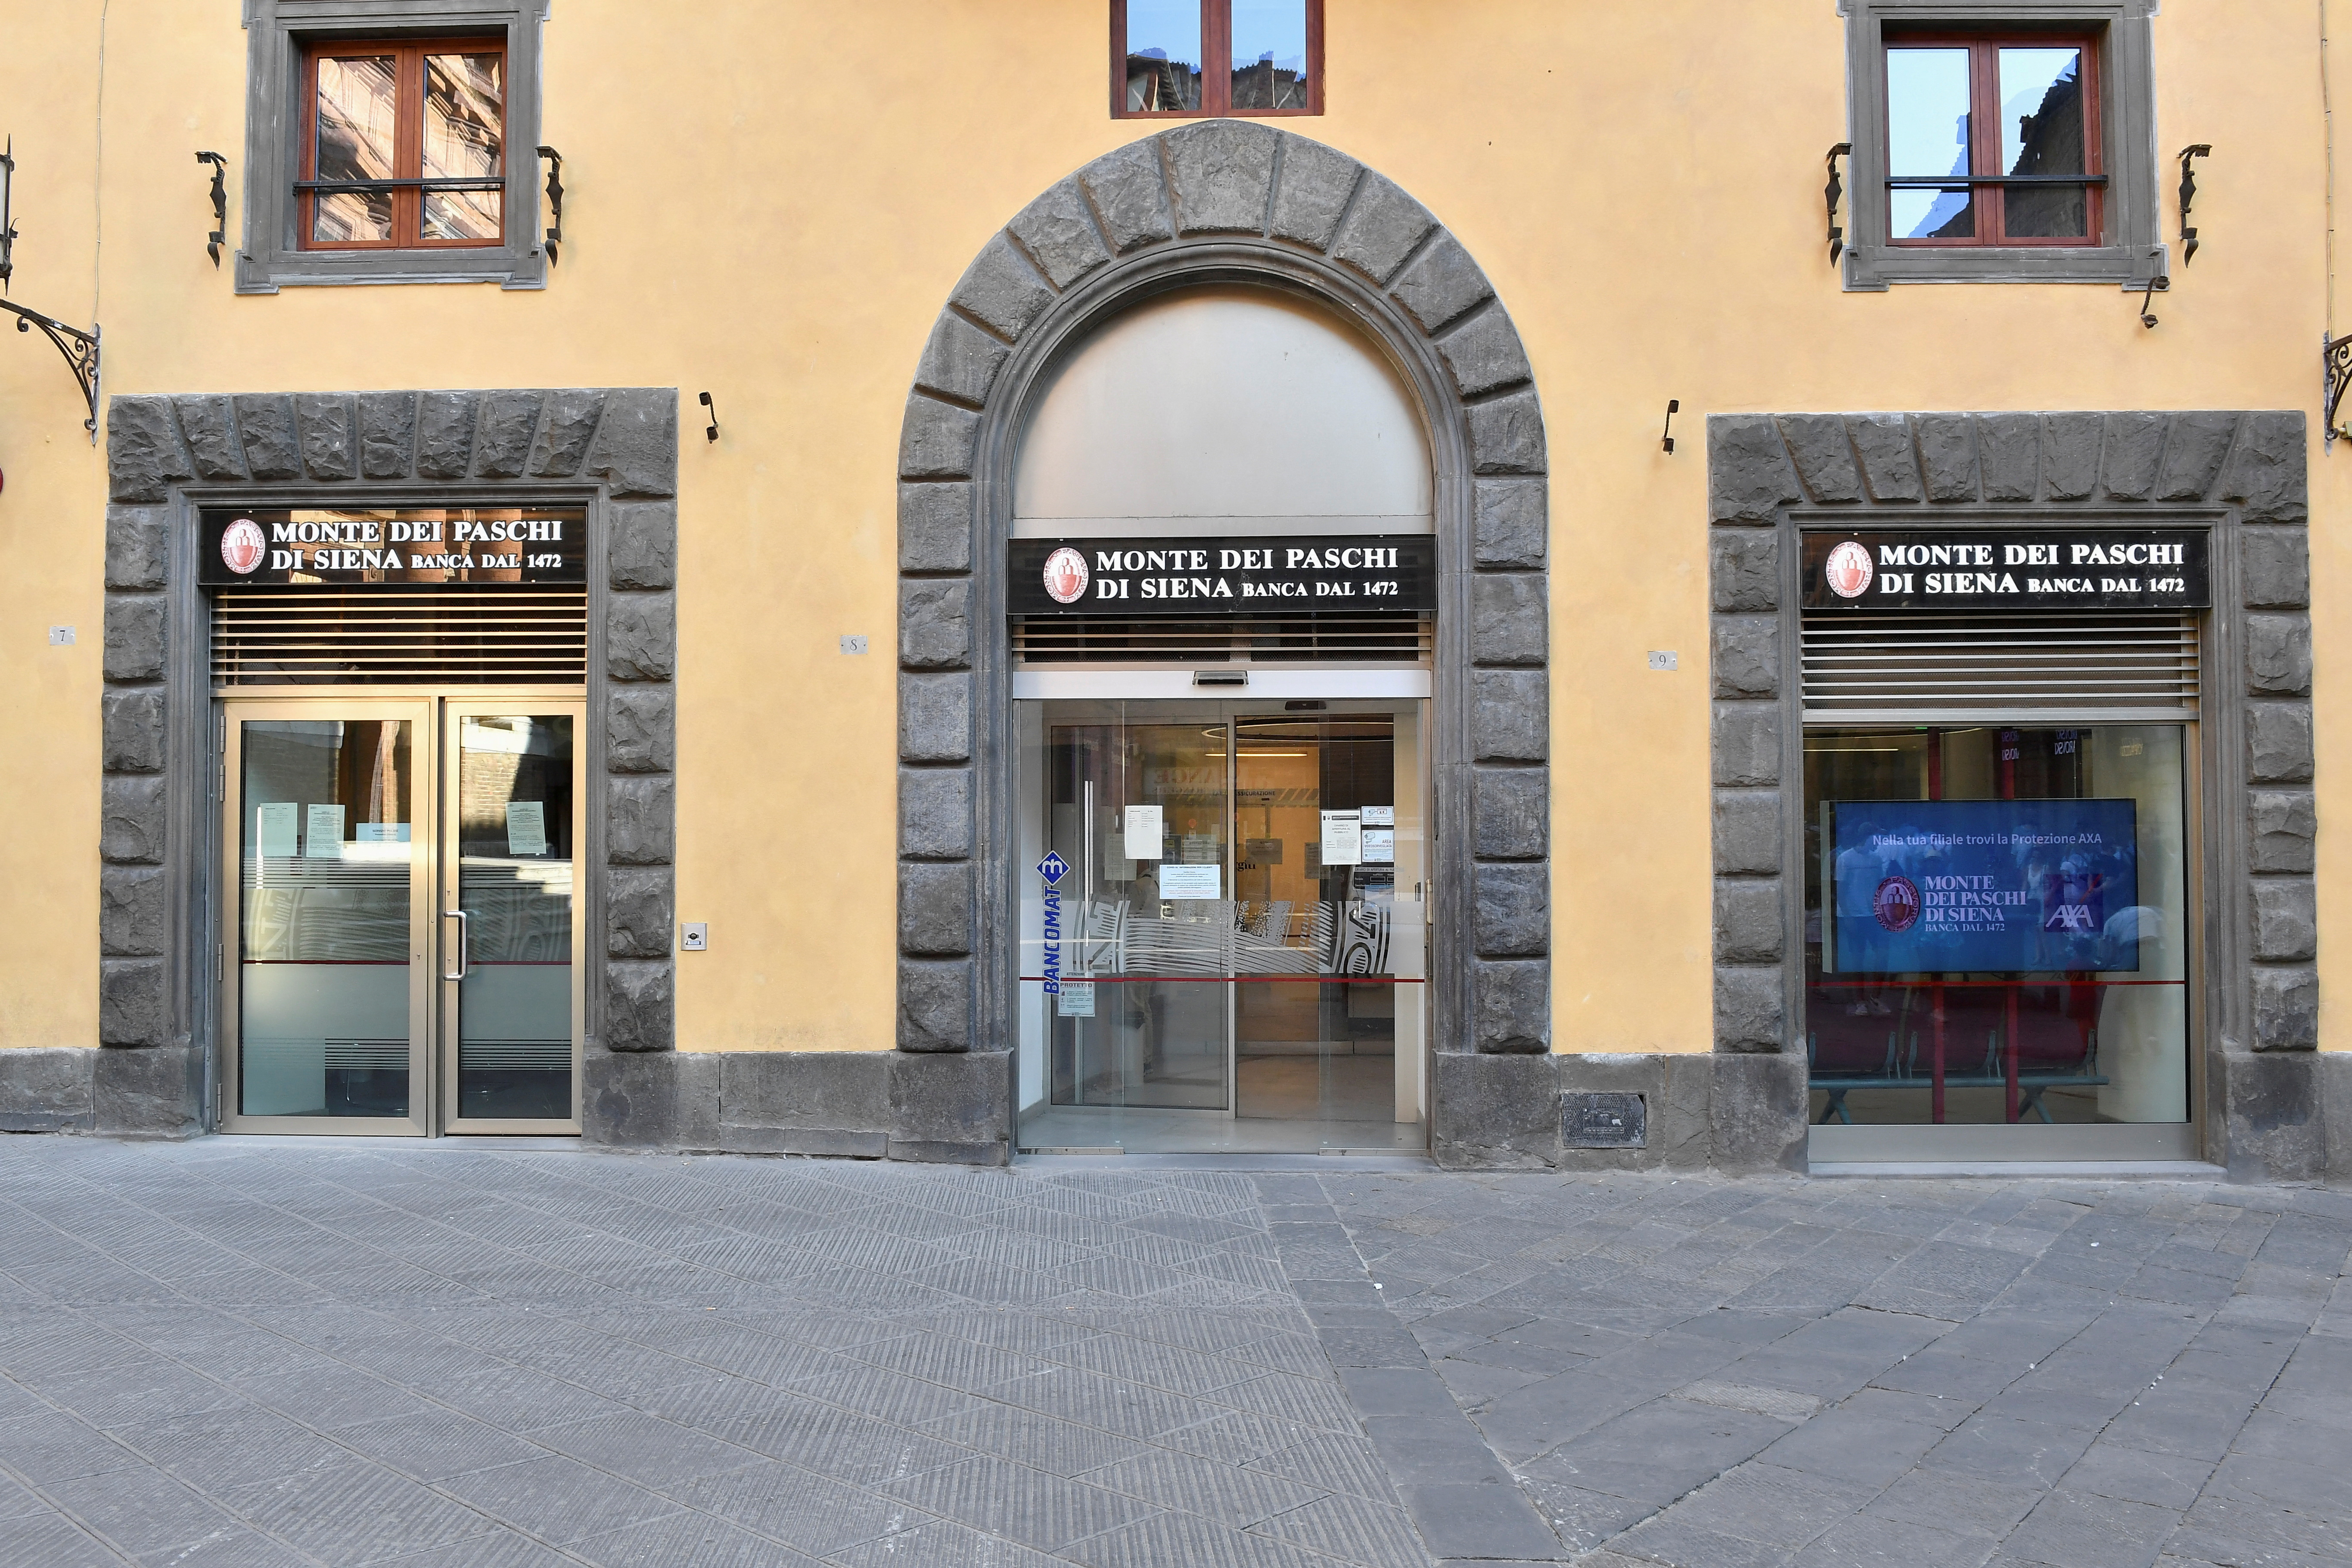 A branch of Monte dei Paschi di Siena (MPS) bank in Siena, Italy